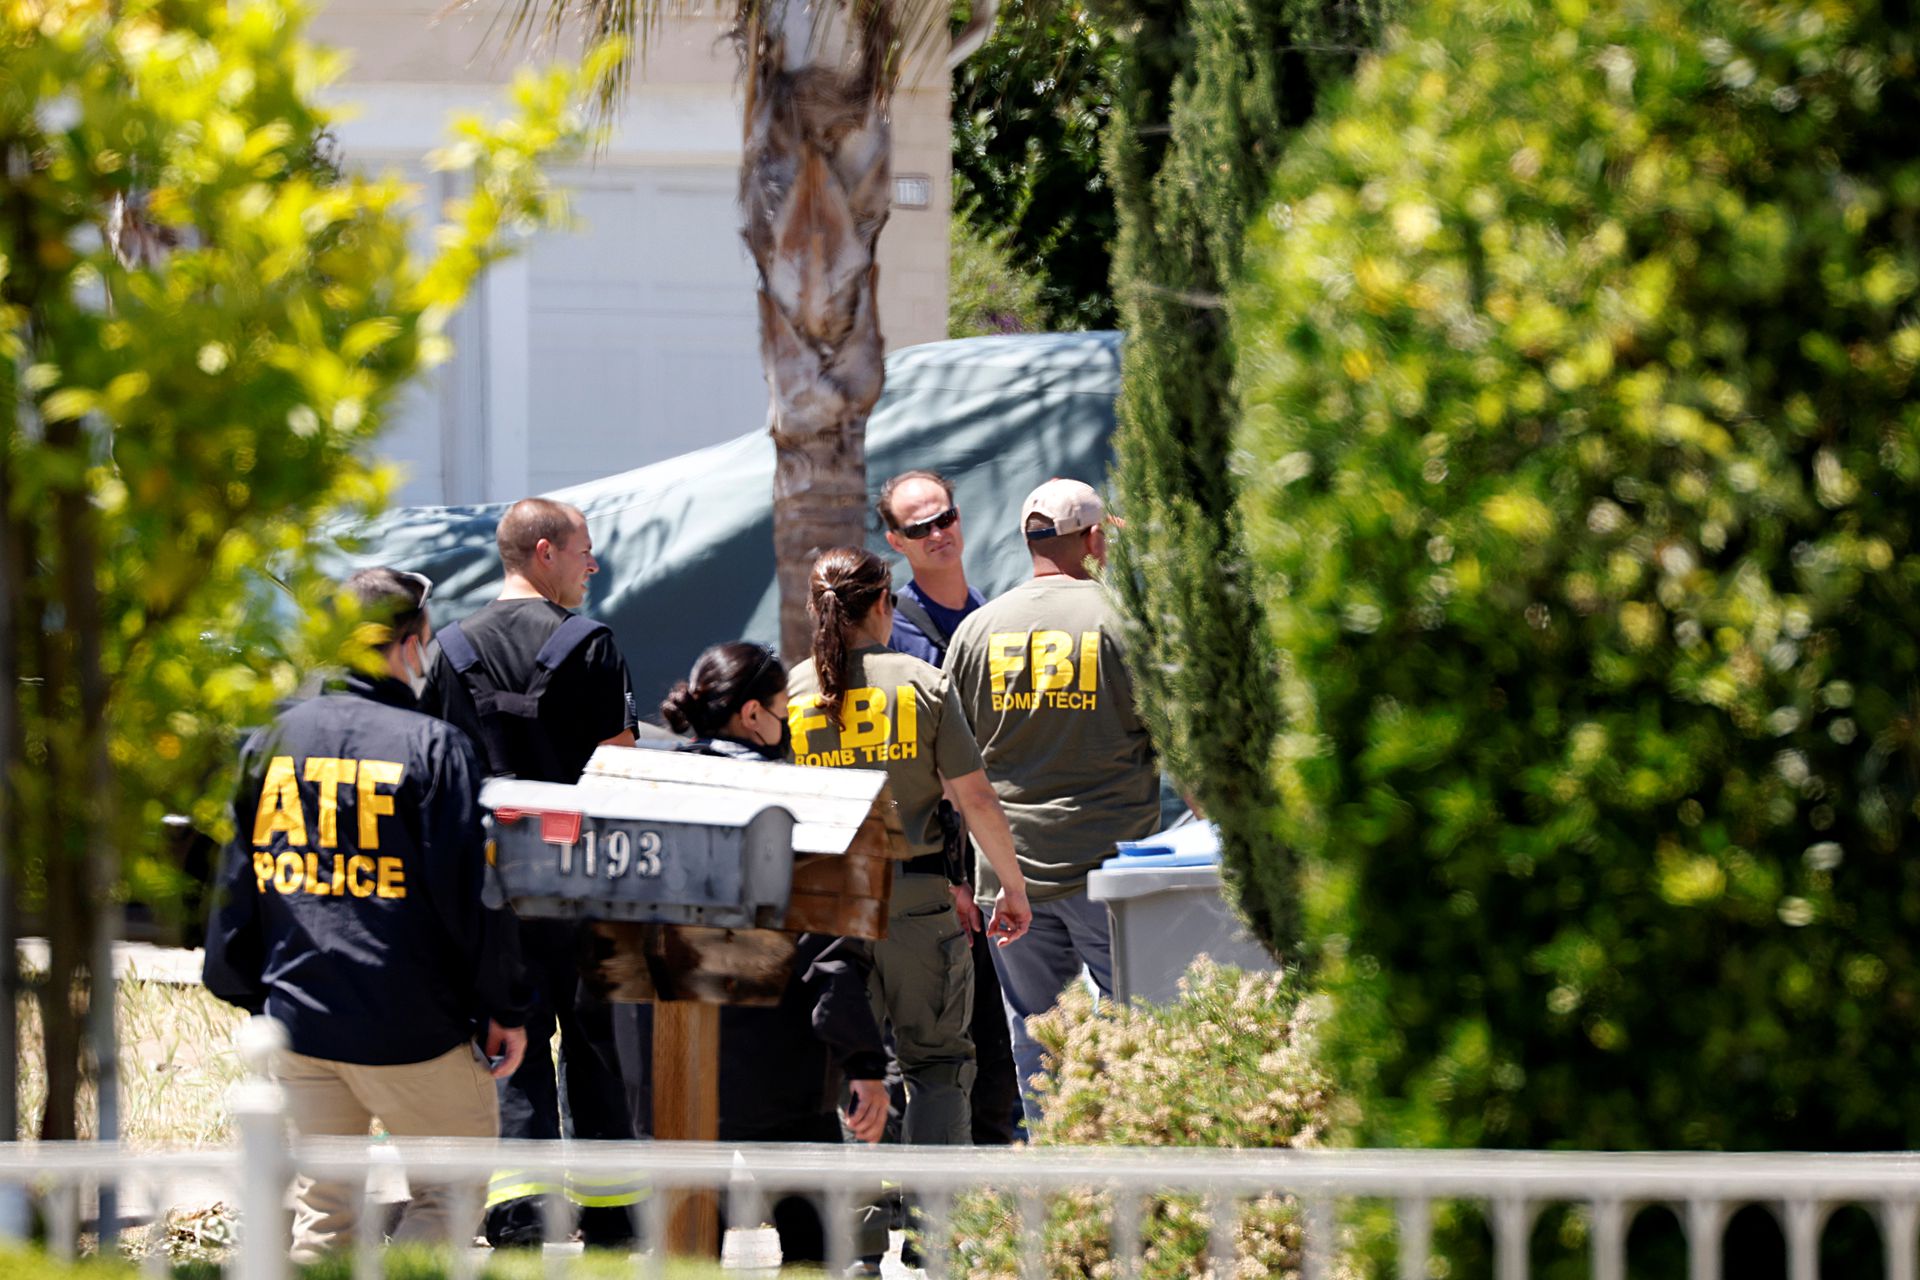 ATF and FBI agents approach the scene of the Santa Clara Valley Transportation Authority mass shooting suspect's house, after a fire at the home of the suspect erupted at about the same time as the shooting, in San Jose, California, U.S. May 26, 2021. Photo: Reuters